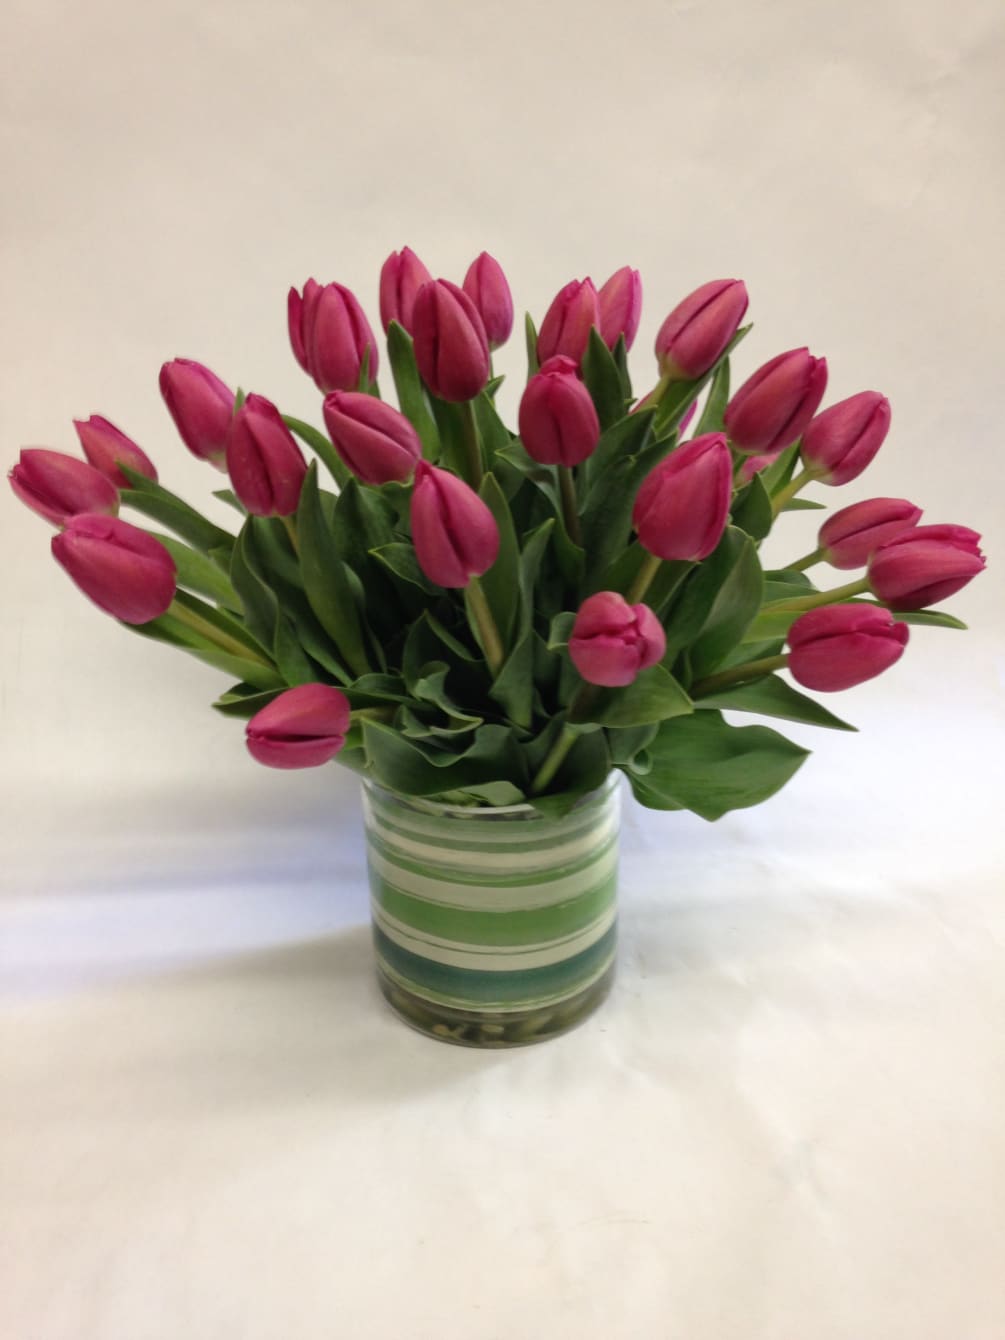 30 stems of locally grown tulips in a vase. (Some flowers may